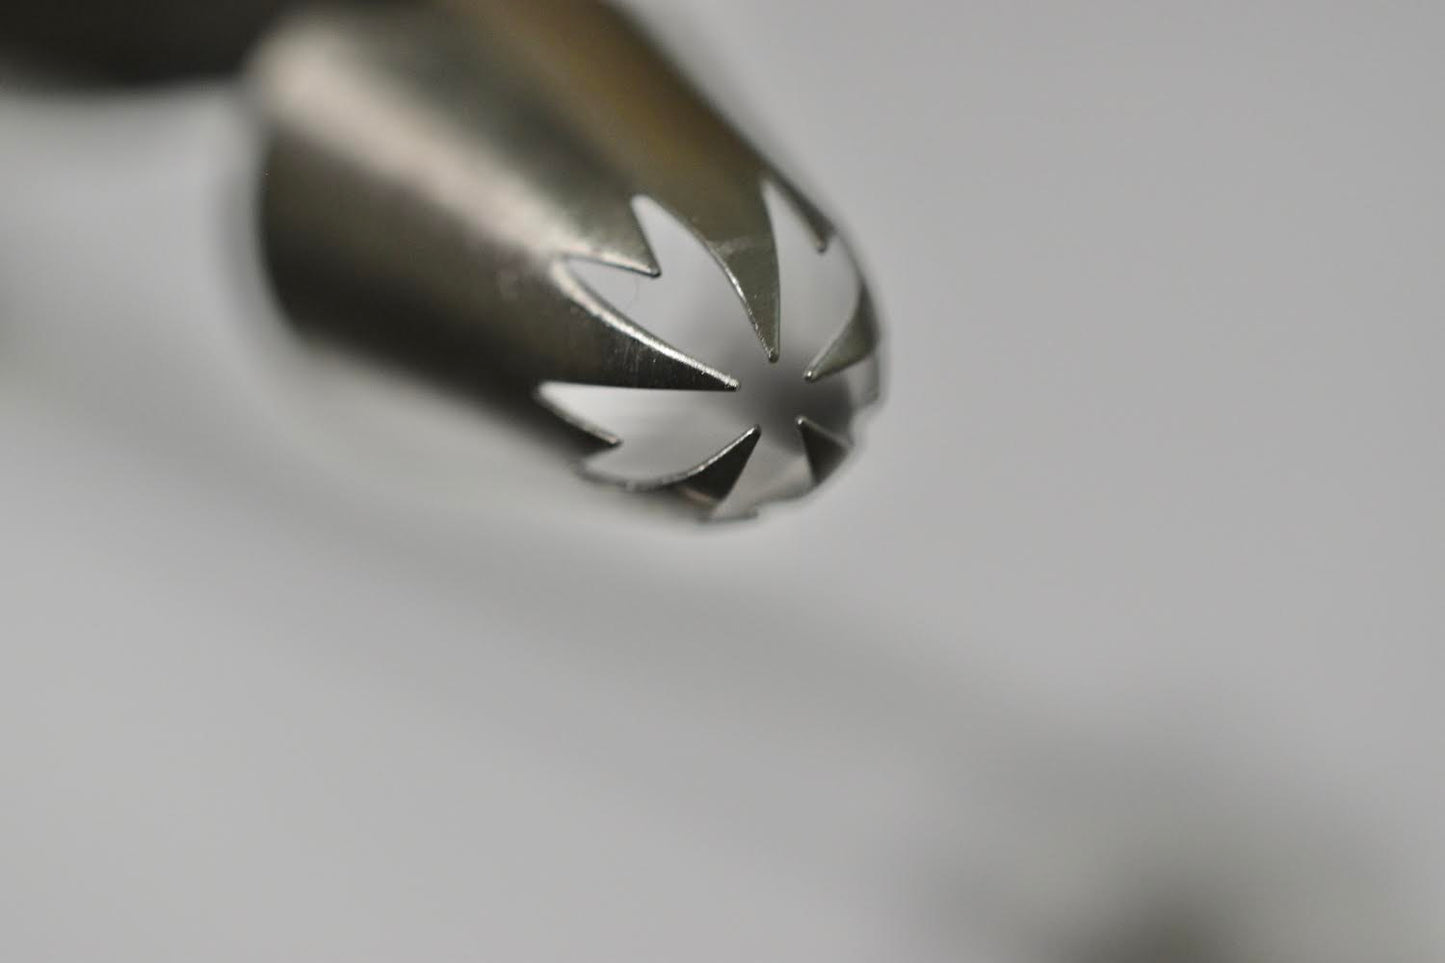 A metal piping tip with a jagged star opening on one end. The other end is open. The piping tip is on its side. It is against a white background.